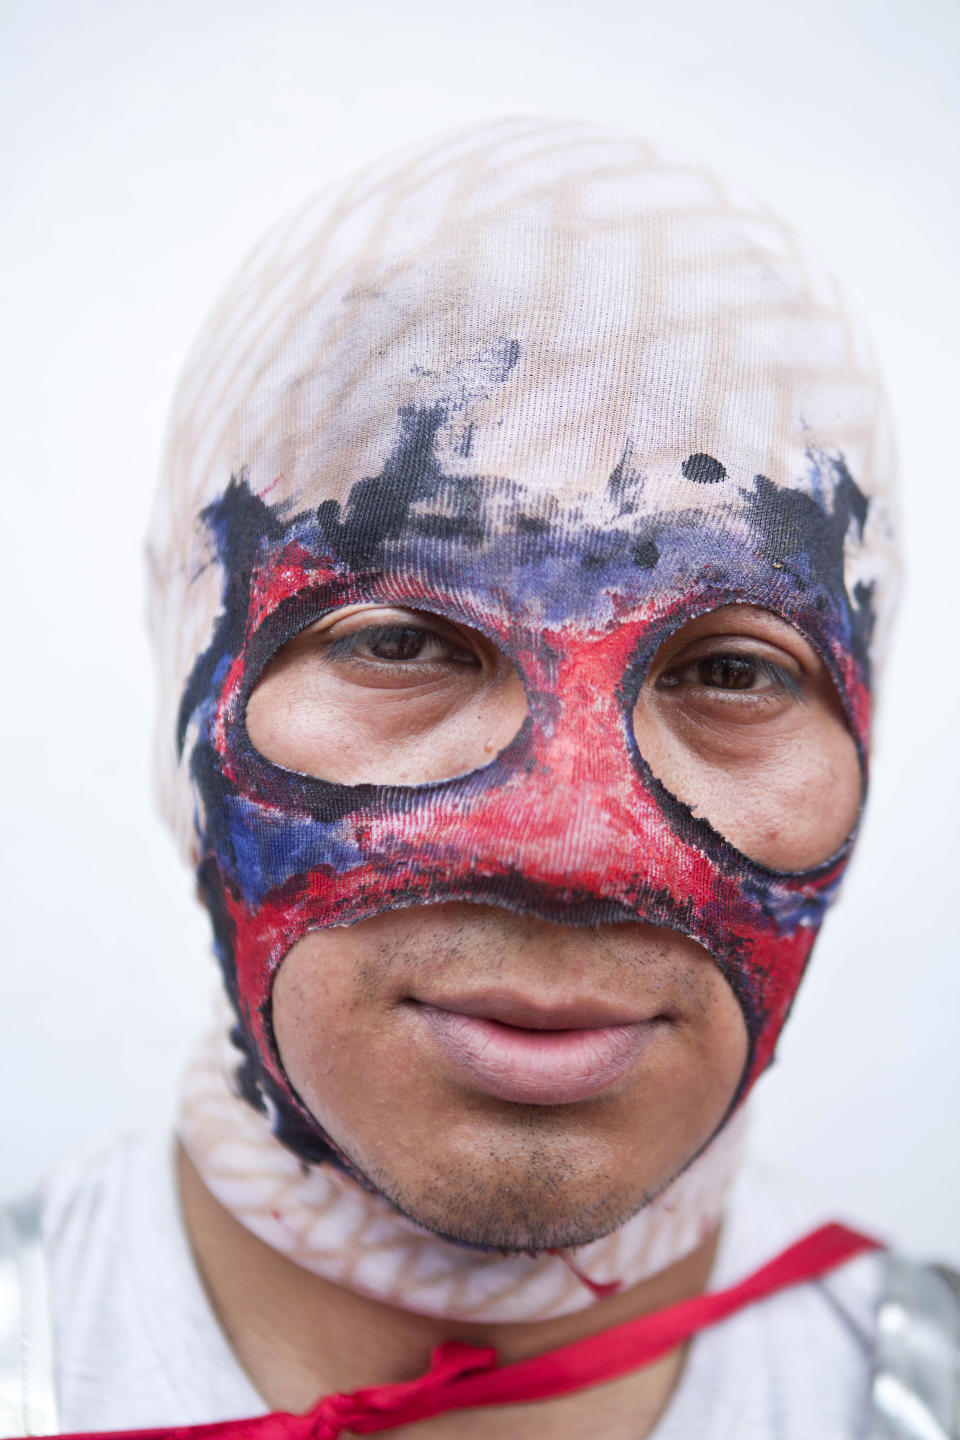 In this April 18, 2014 photo, a youth with a mask poses for a picture during a break while participating in "Los Encadenados," or The Chained Ones procession on Good Friday during Holy Week in Masatepe, Nicaragua. The youth played the part of the crowd who used chains to carry away Jesus and Judas. More than 900 people participated in the event this year, some to keep the tradition alive and others to repay a promise to God. (AP Photo/Esteban Felix)